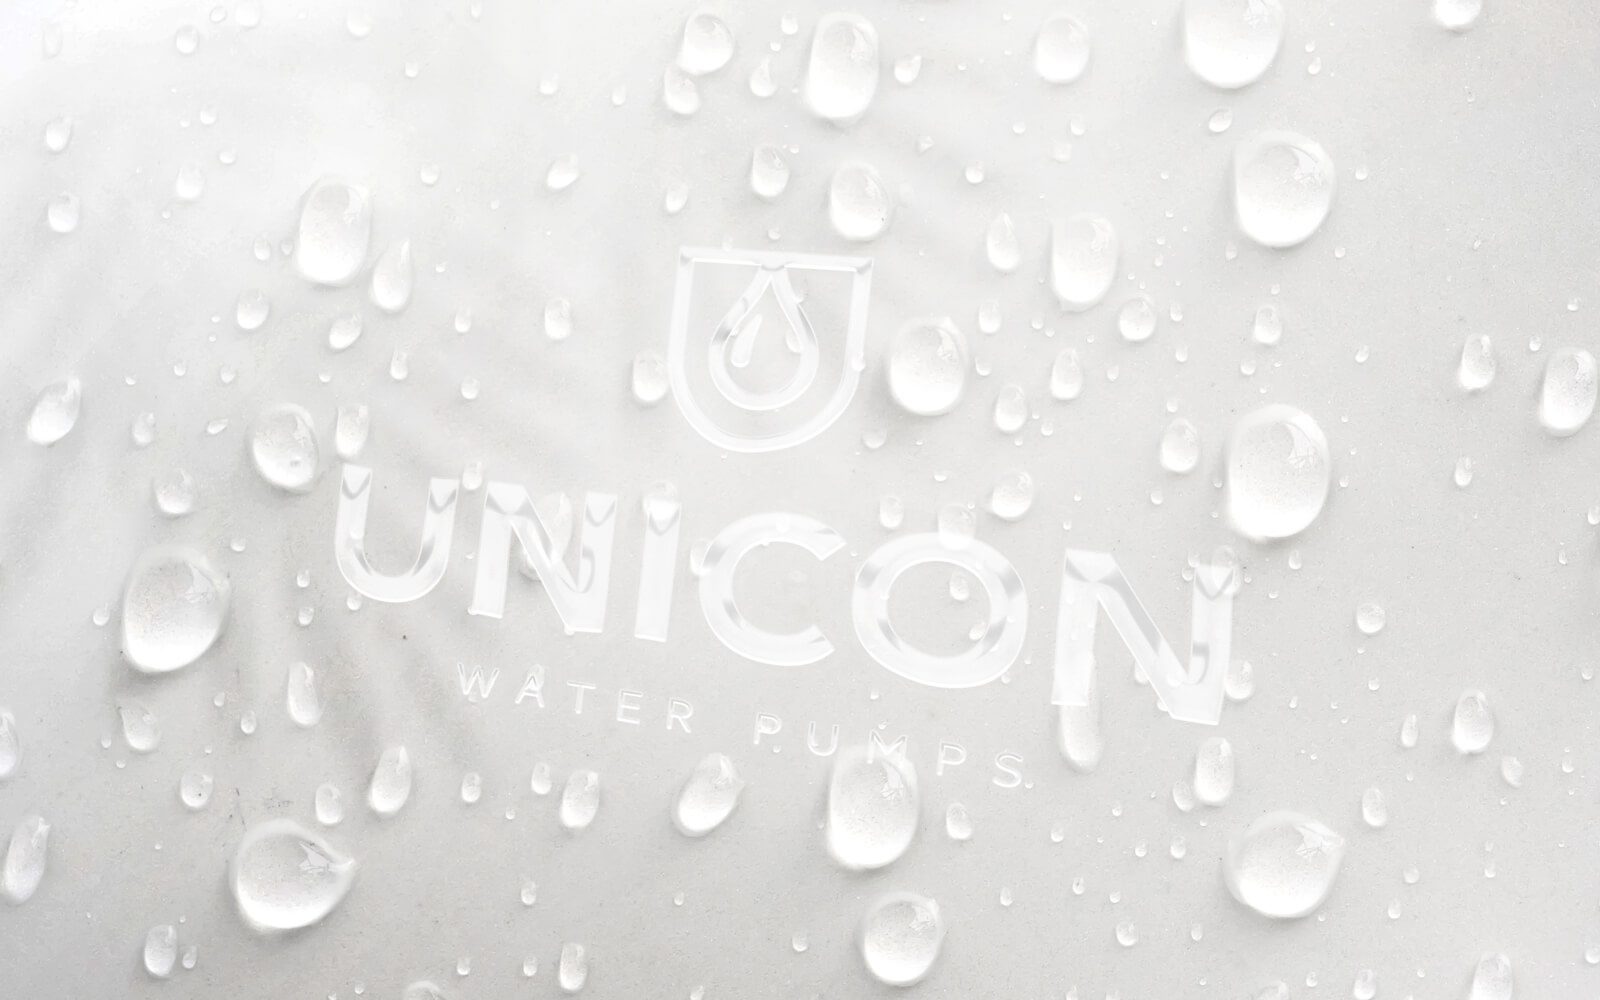 Unicon | Industrial Manufacture Branding-water Logo